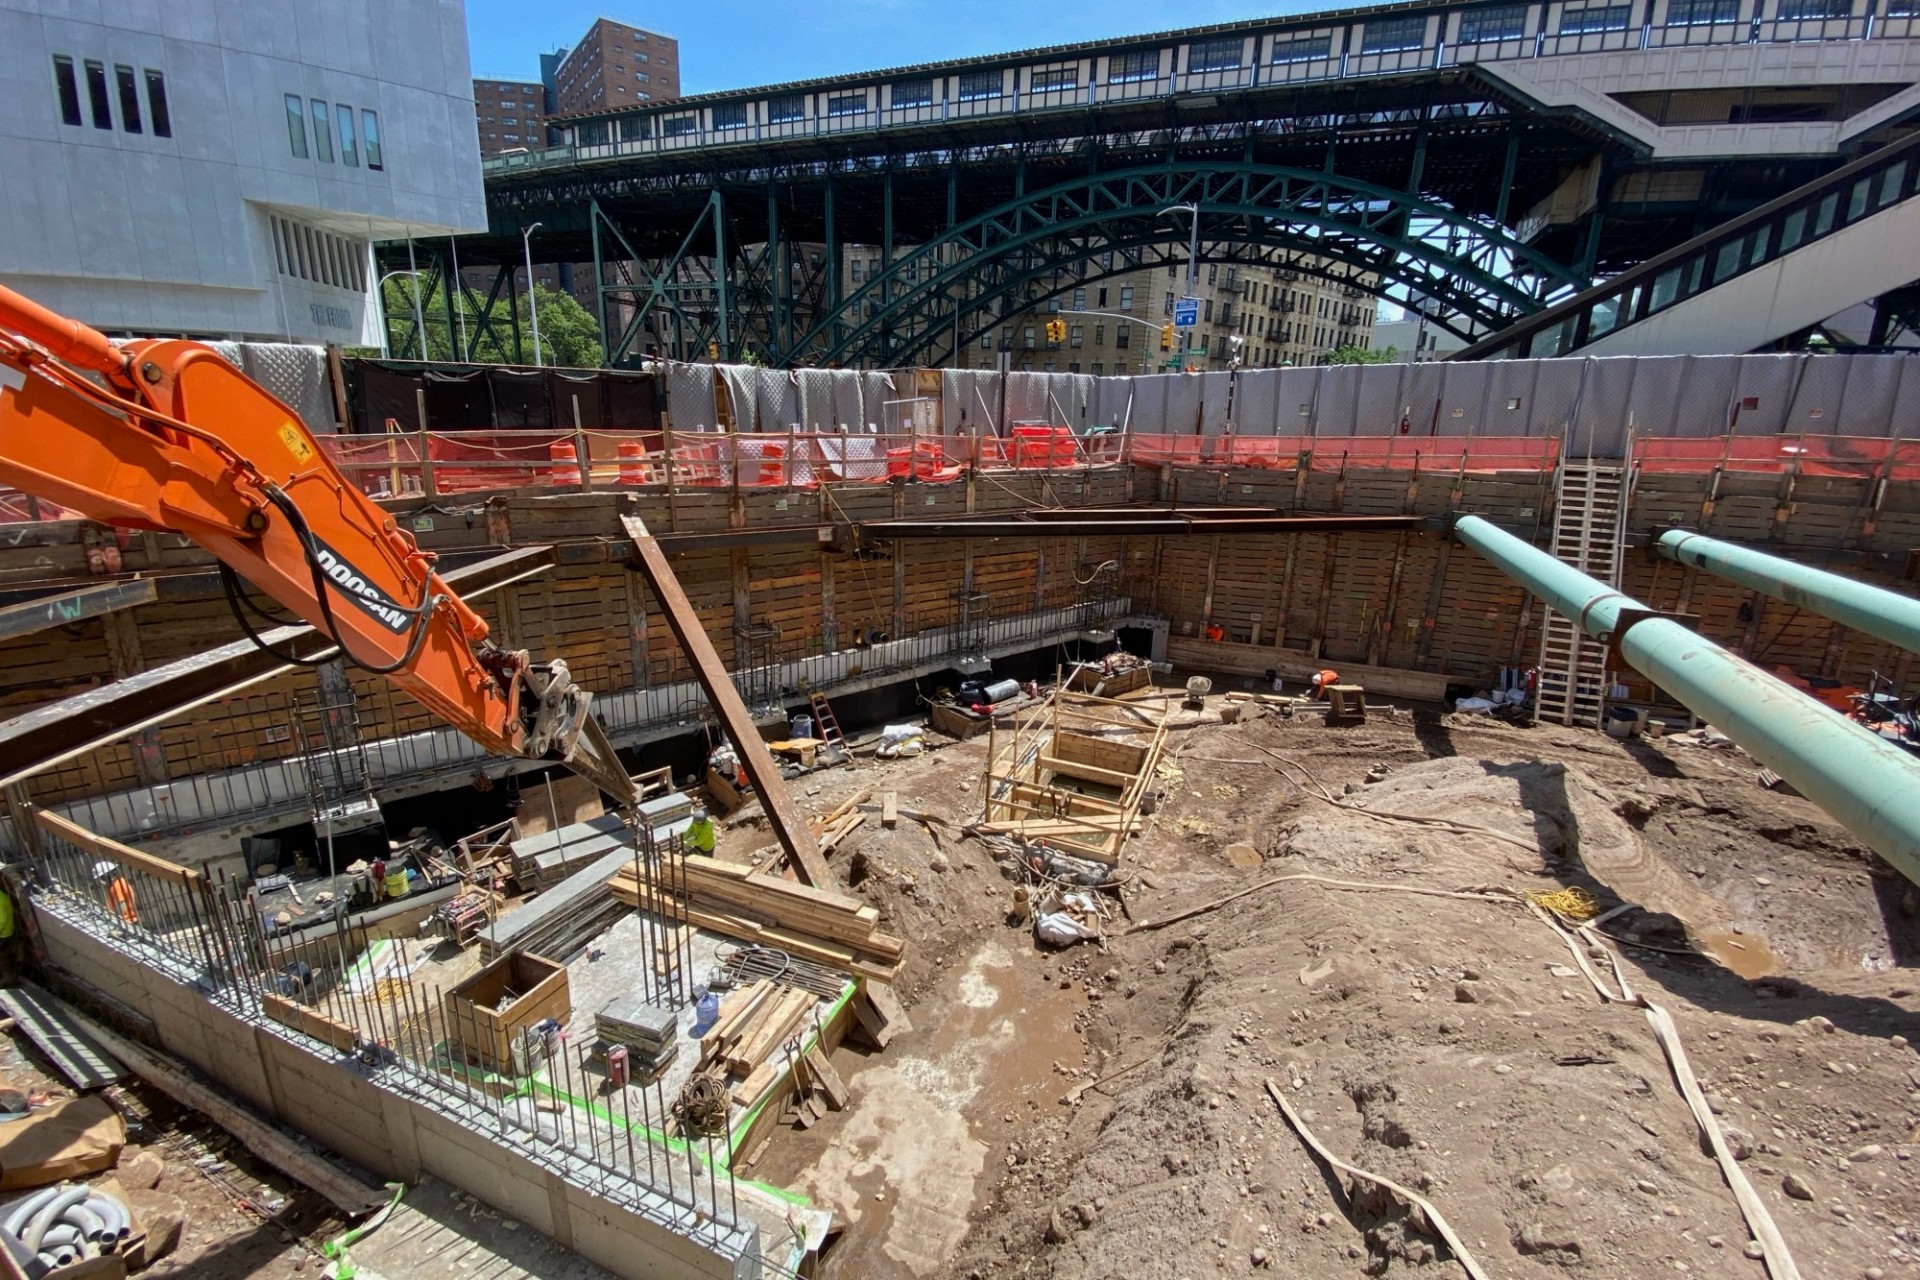 A view of the 600 W. 125th Street construction site with steel beams running across a dirt pit abd the elevated 1 train station in the background.